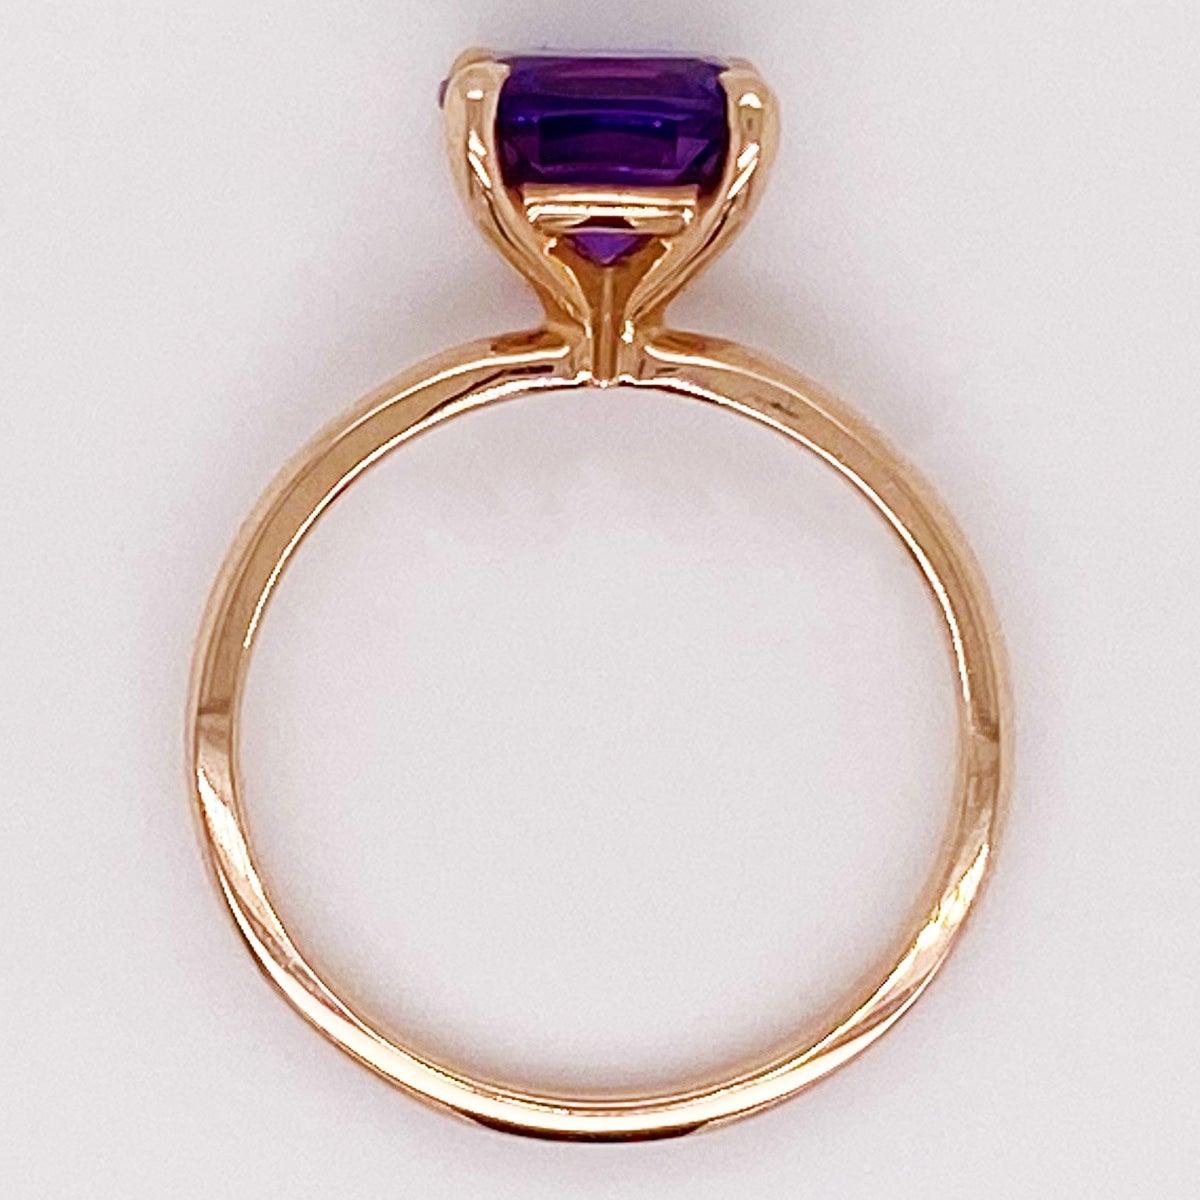 For Sale:  Rose Gold Amethyst Ring, 2.20 Ct Gemstone Solitaire, Engagement, Purple Color 4